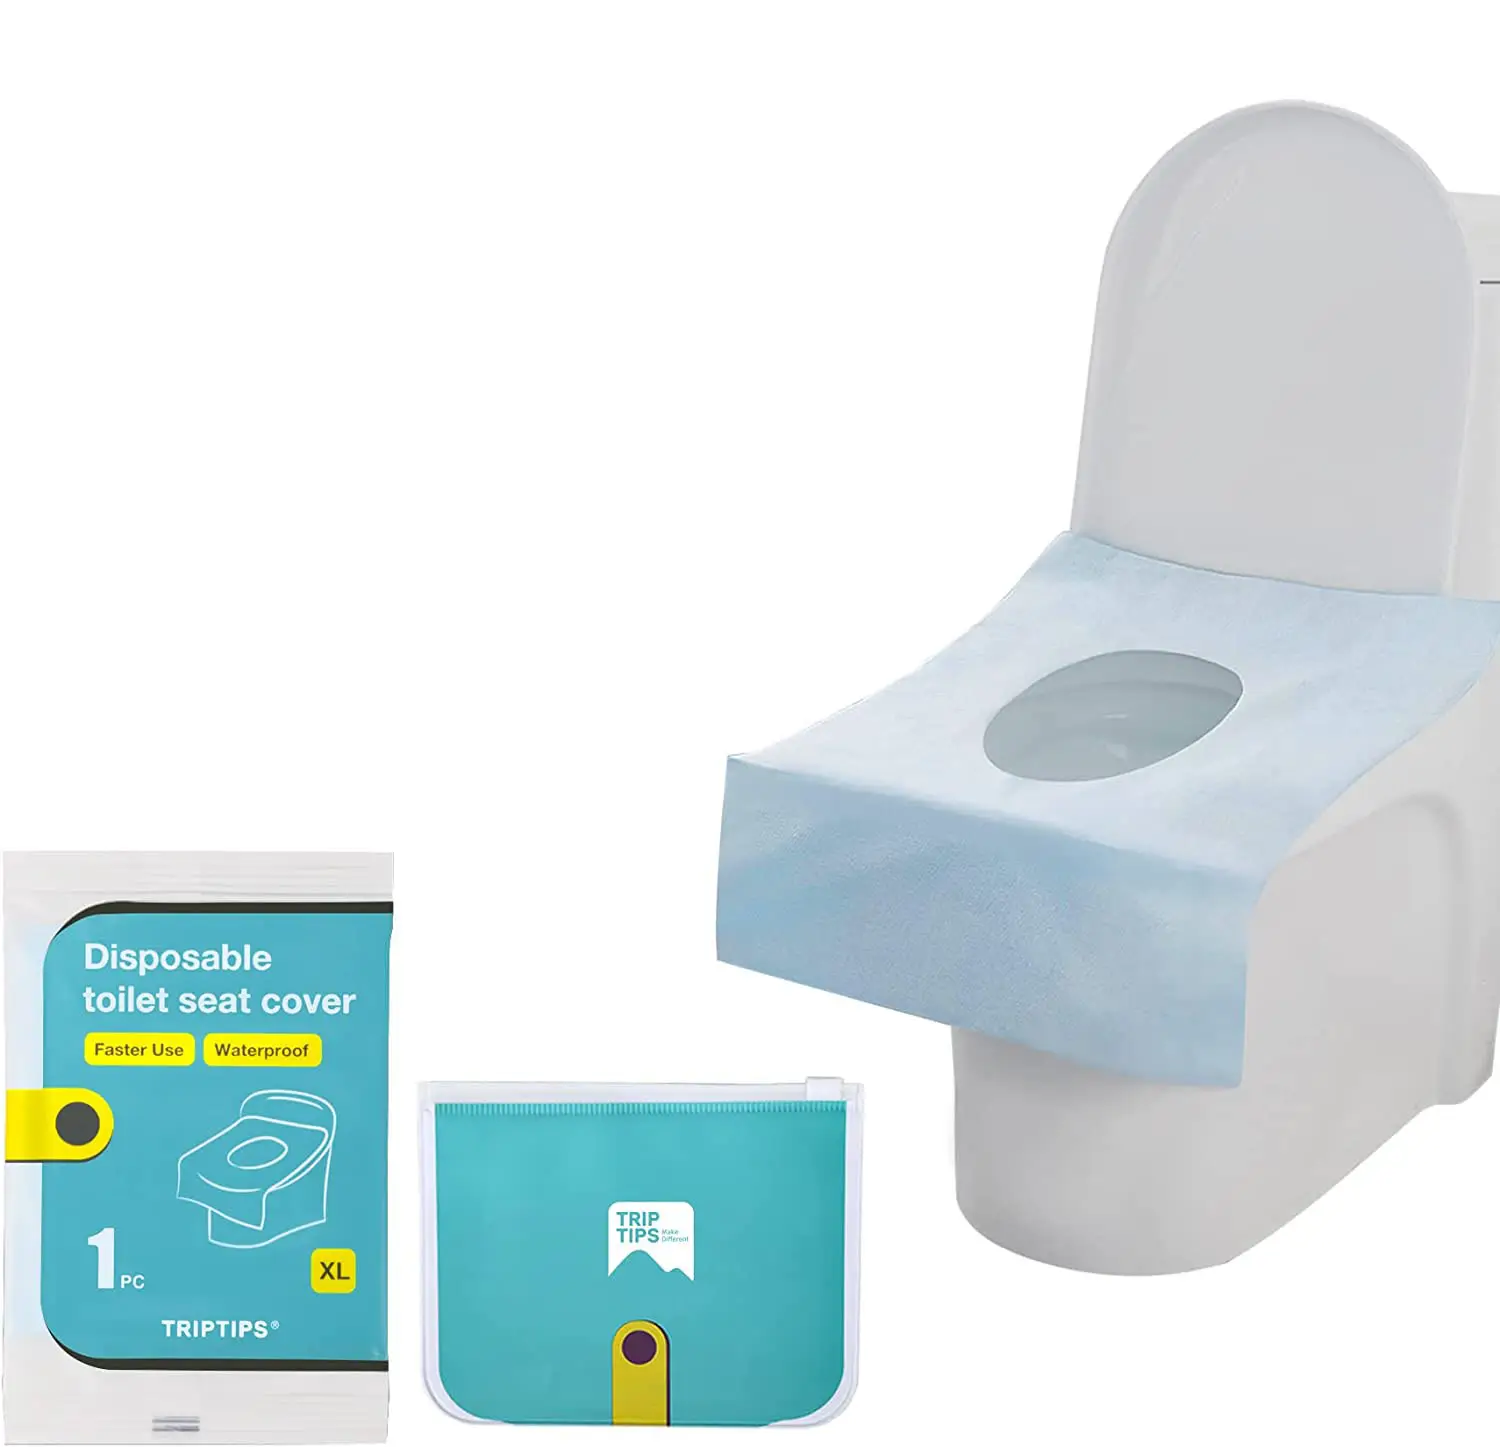 Sticker free Disposable Toilet Seat Covers Faster use Waterproof Disposable Toilet Seat Cover